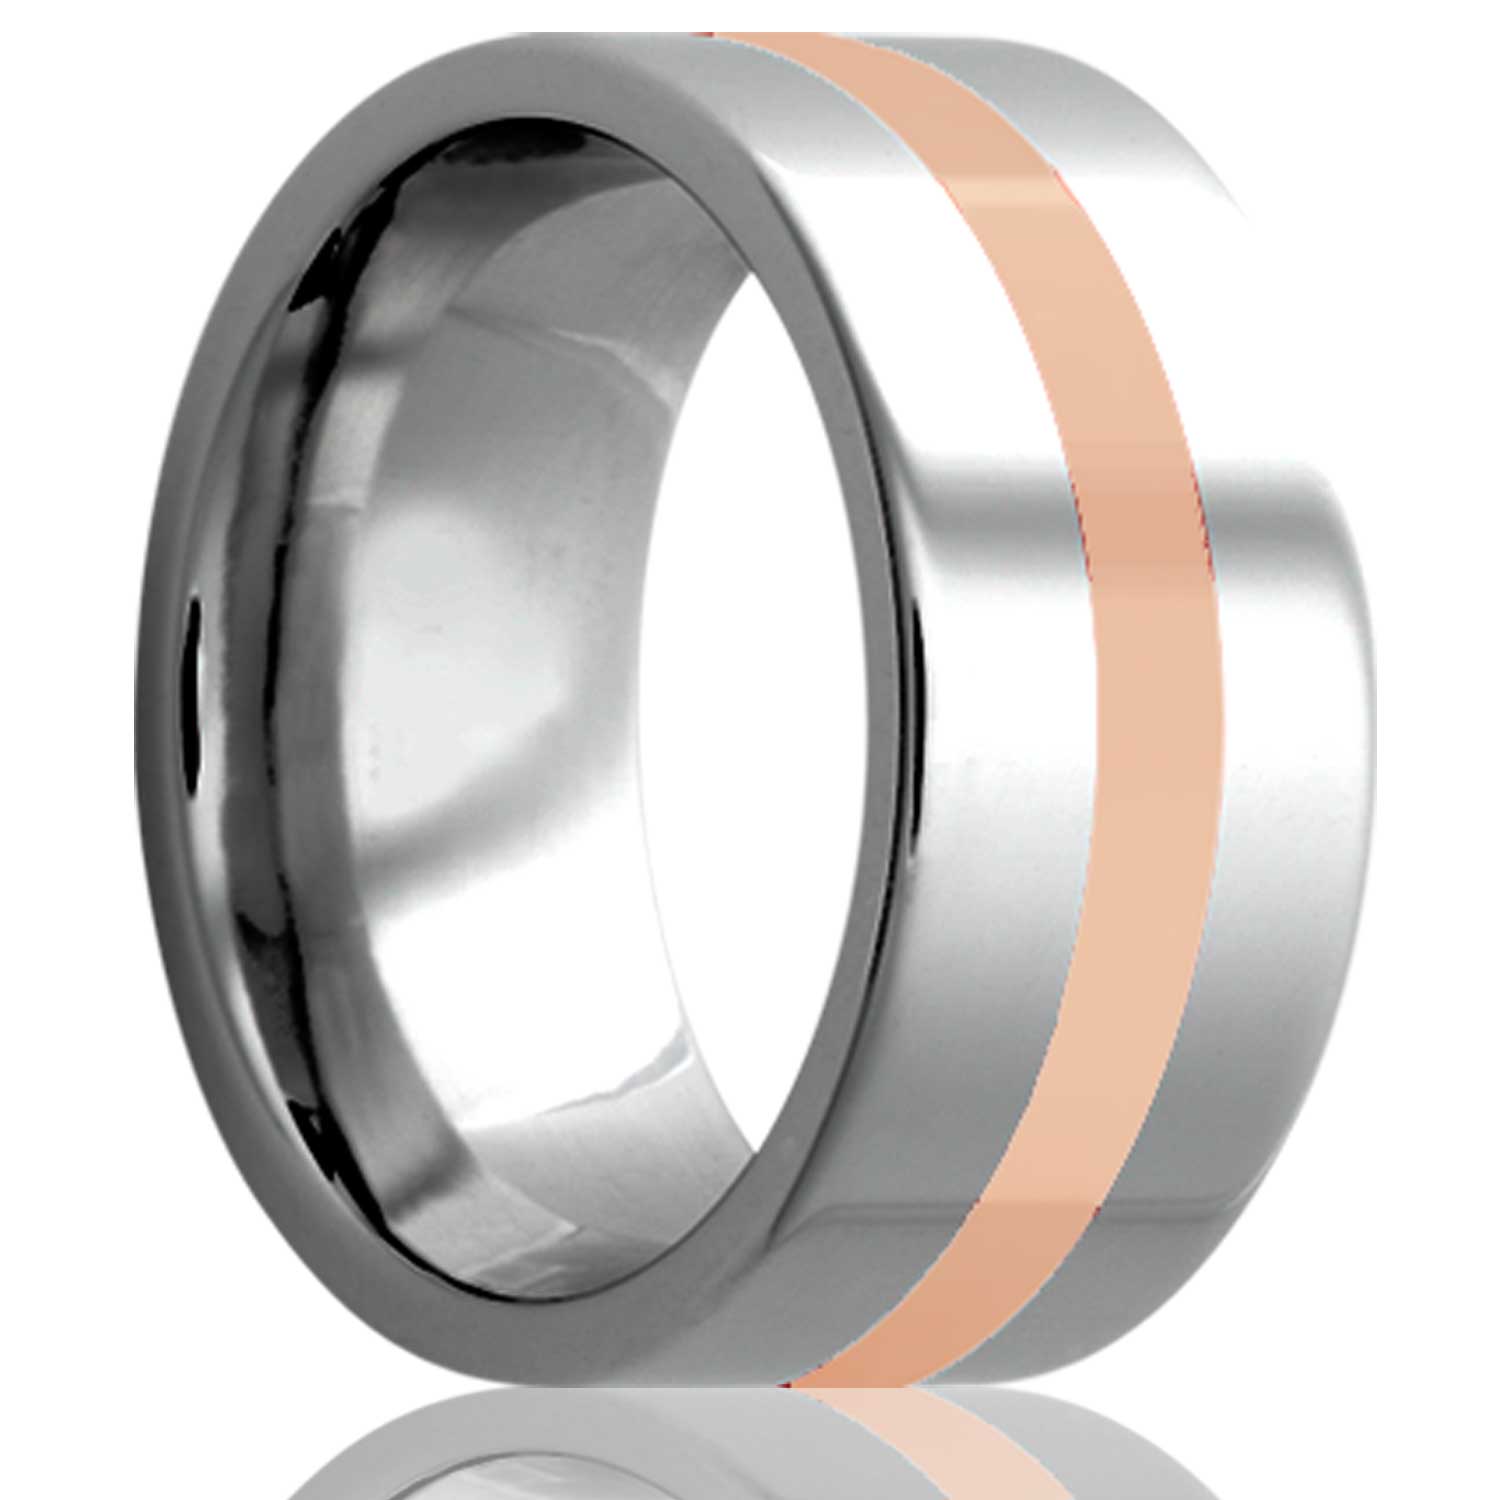 A cobalt wedding band with solid 14k rose gold inlay displayed on a neutral white background.